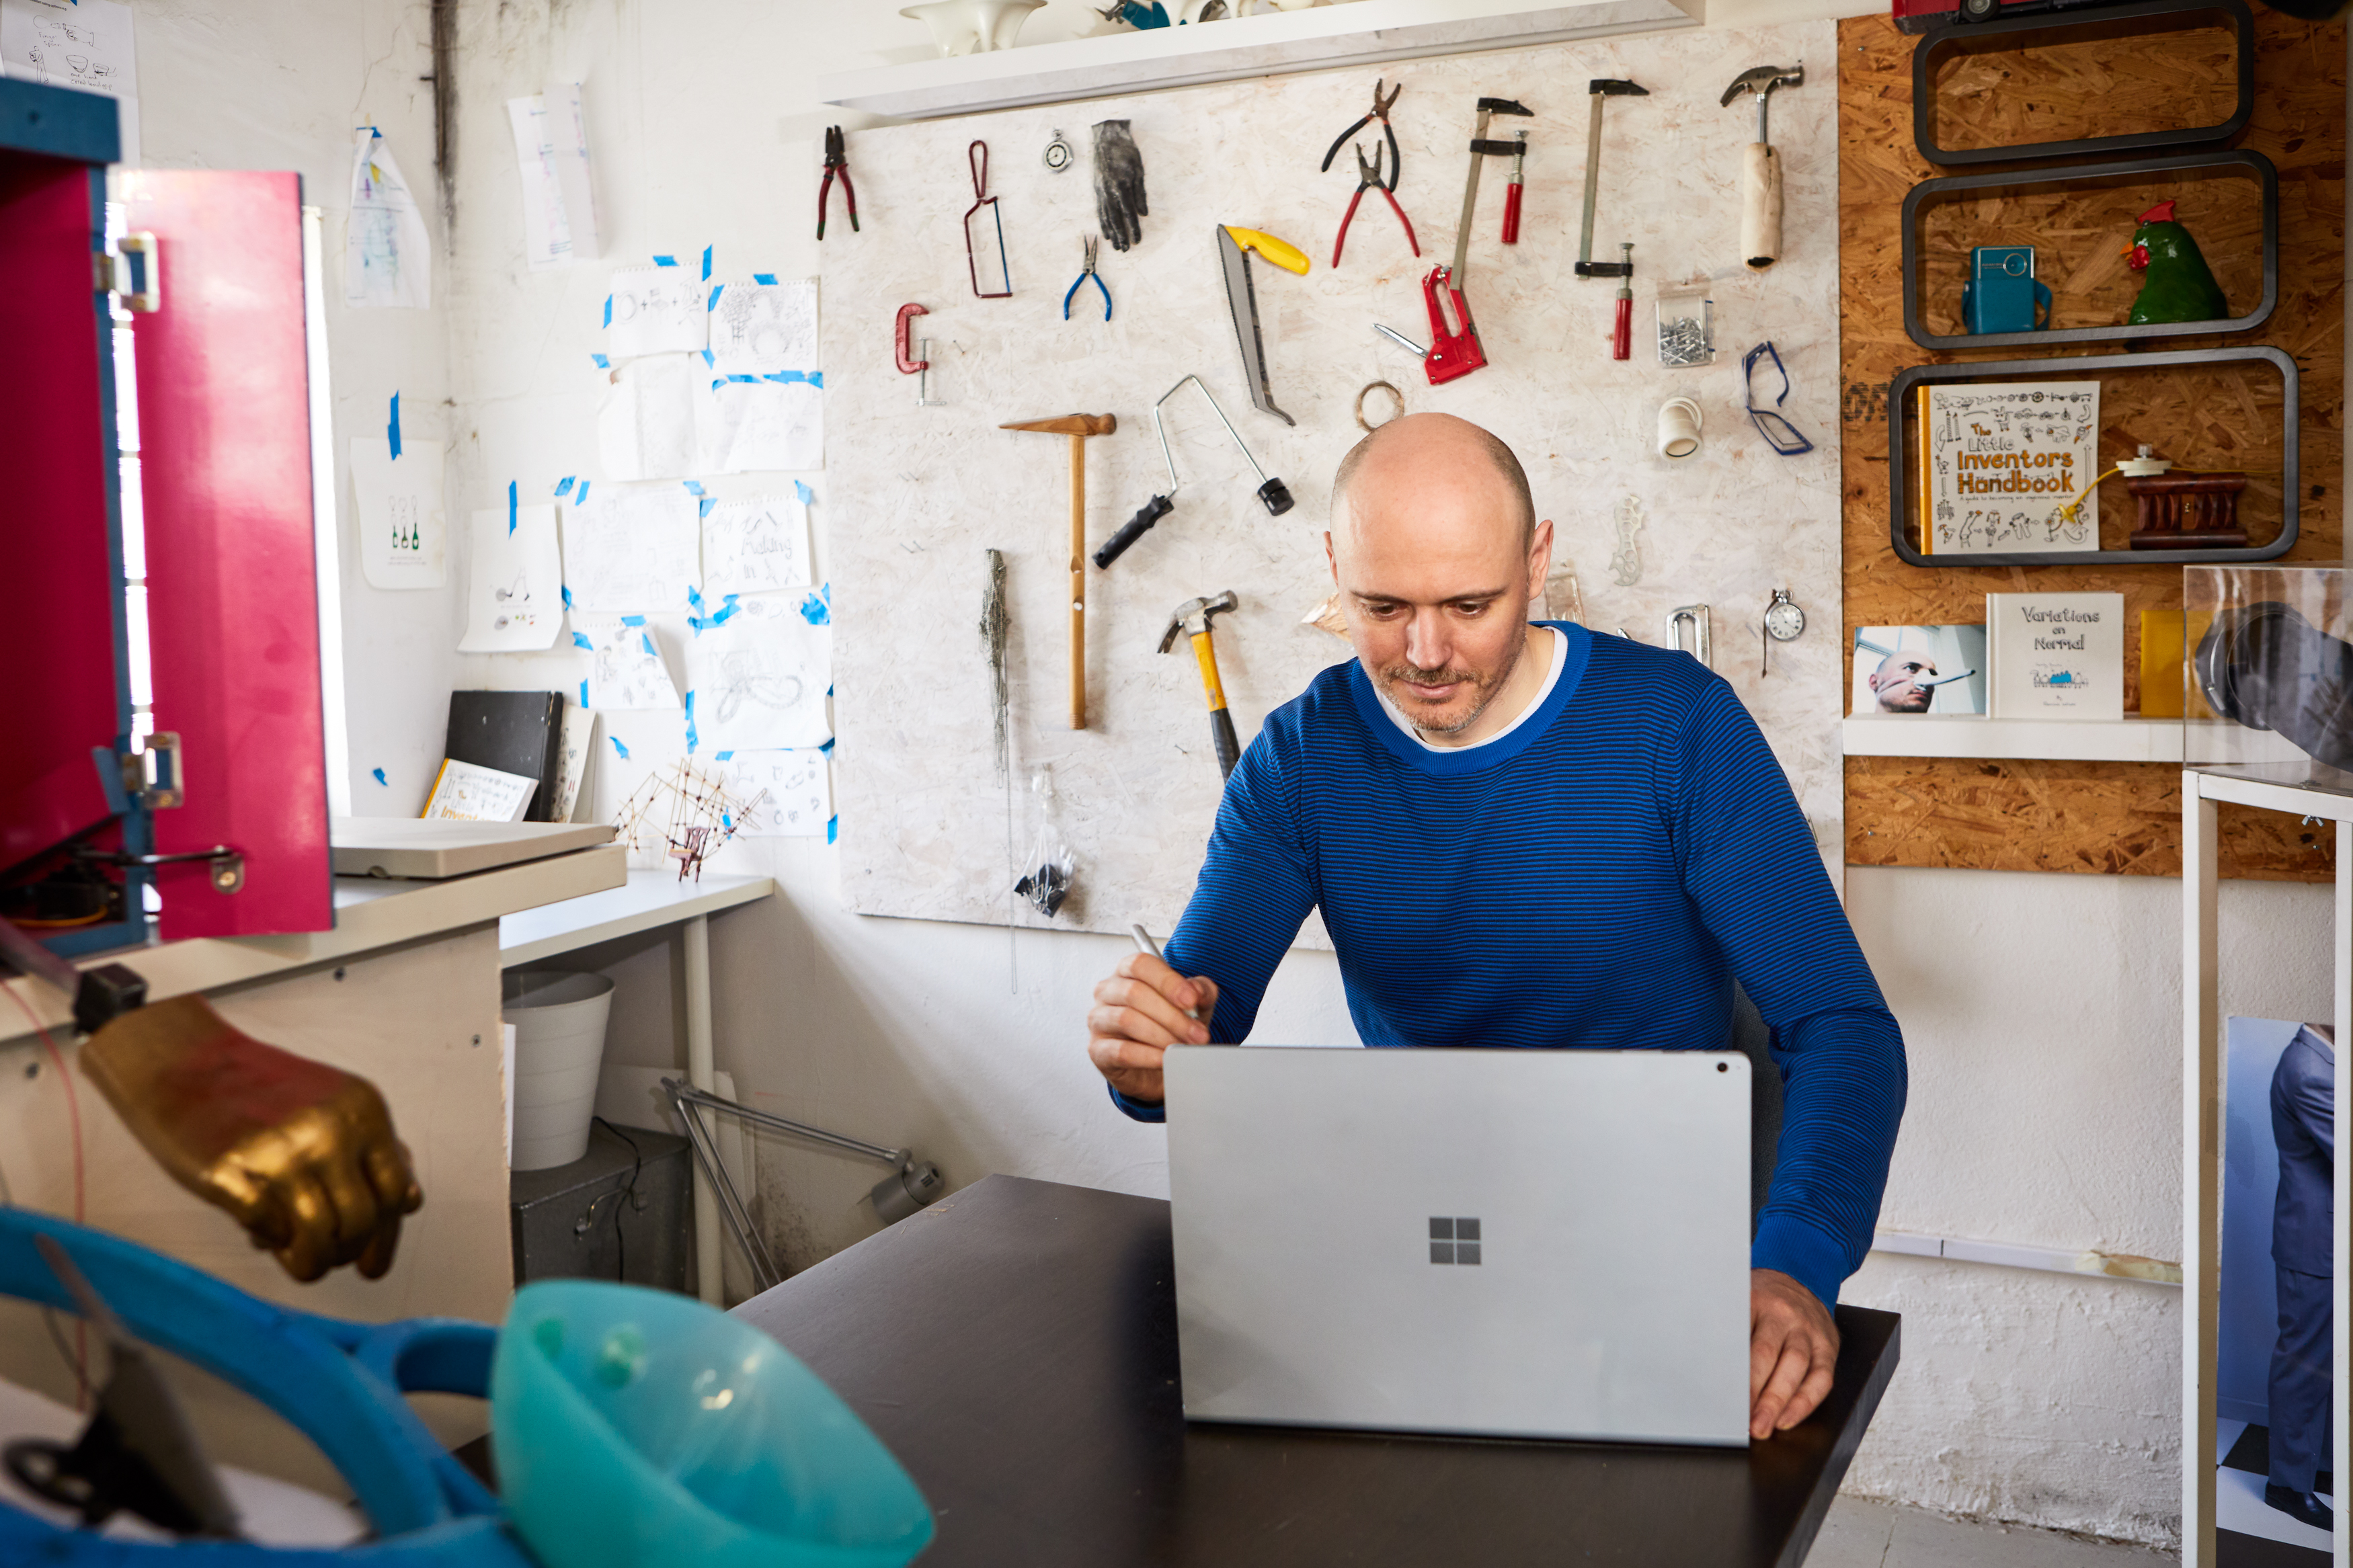 Dominic Wilcox, inventor, works on a Surface Book 2 in his London studio